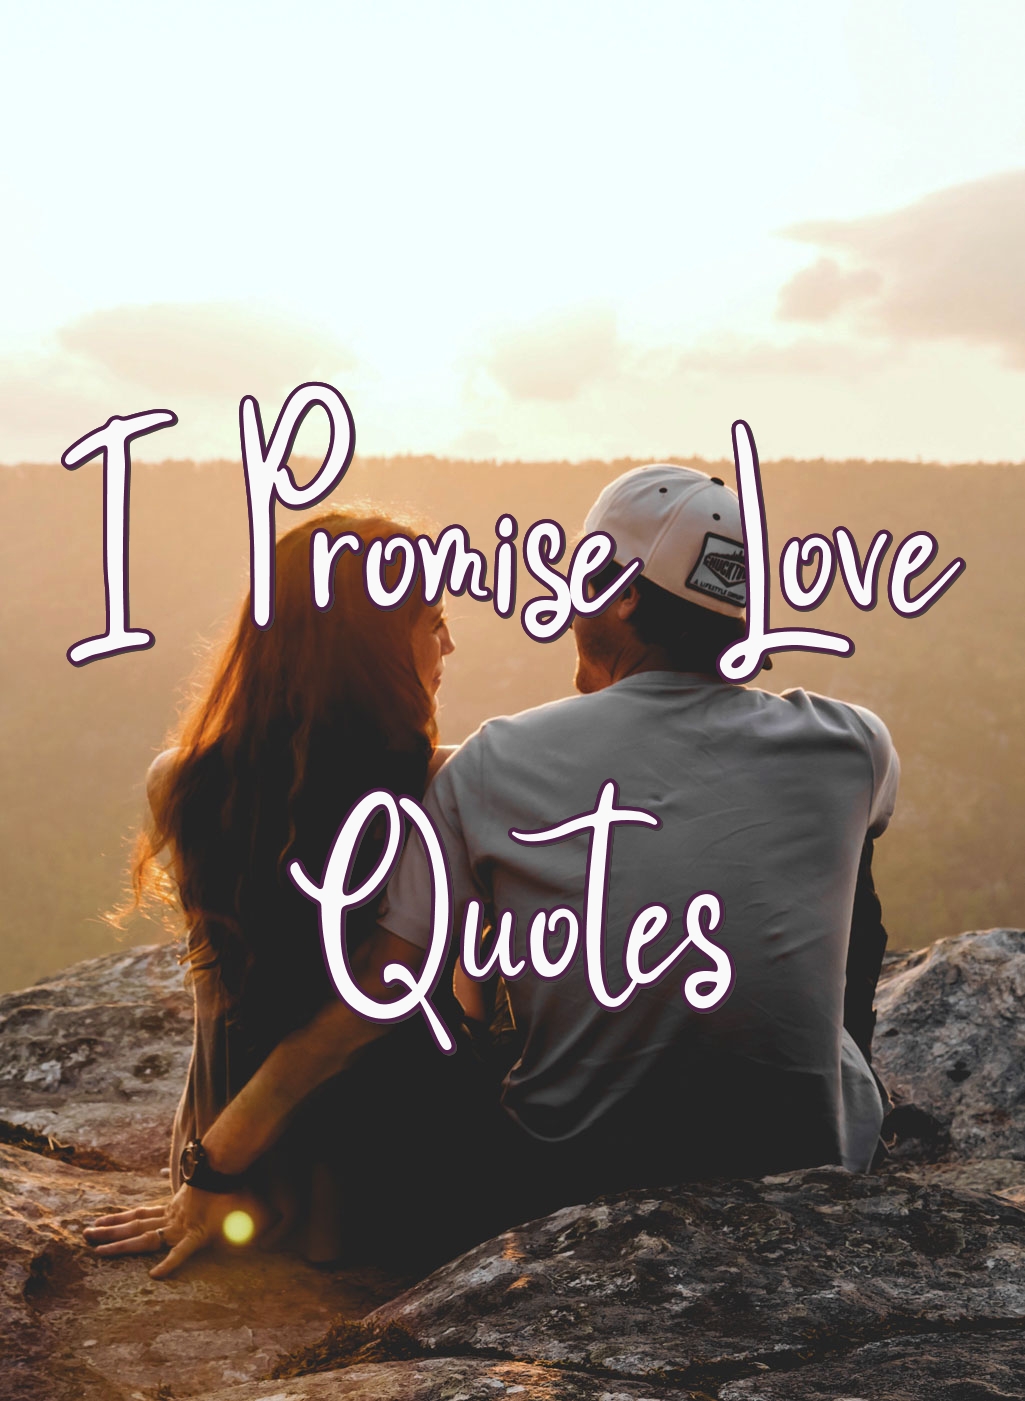 i promise love quotes